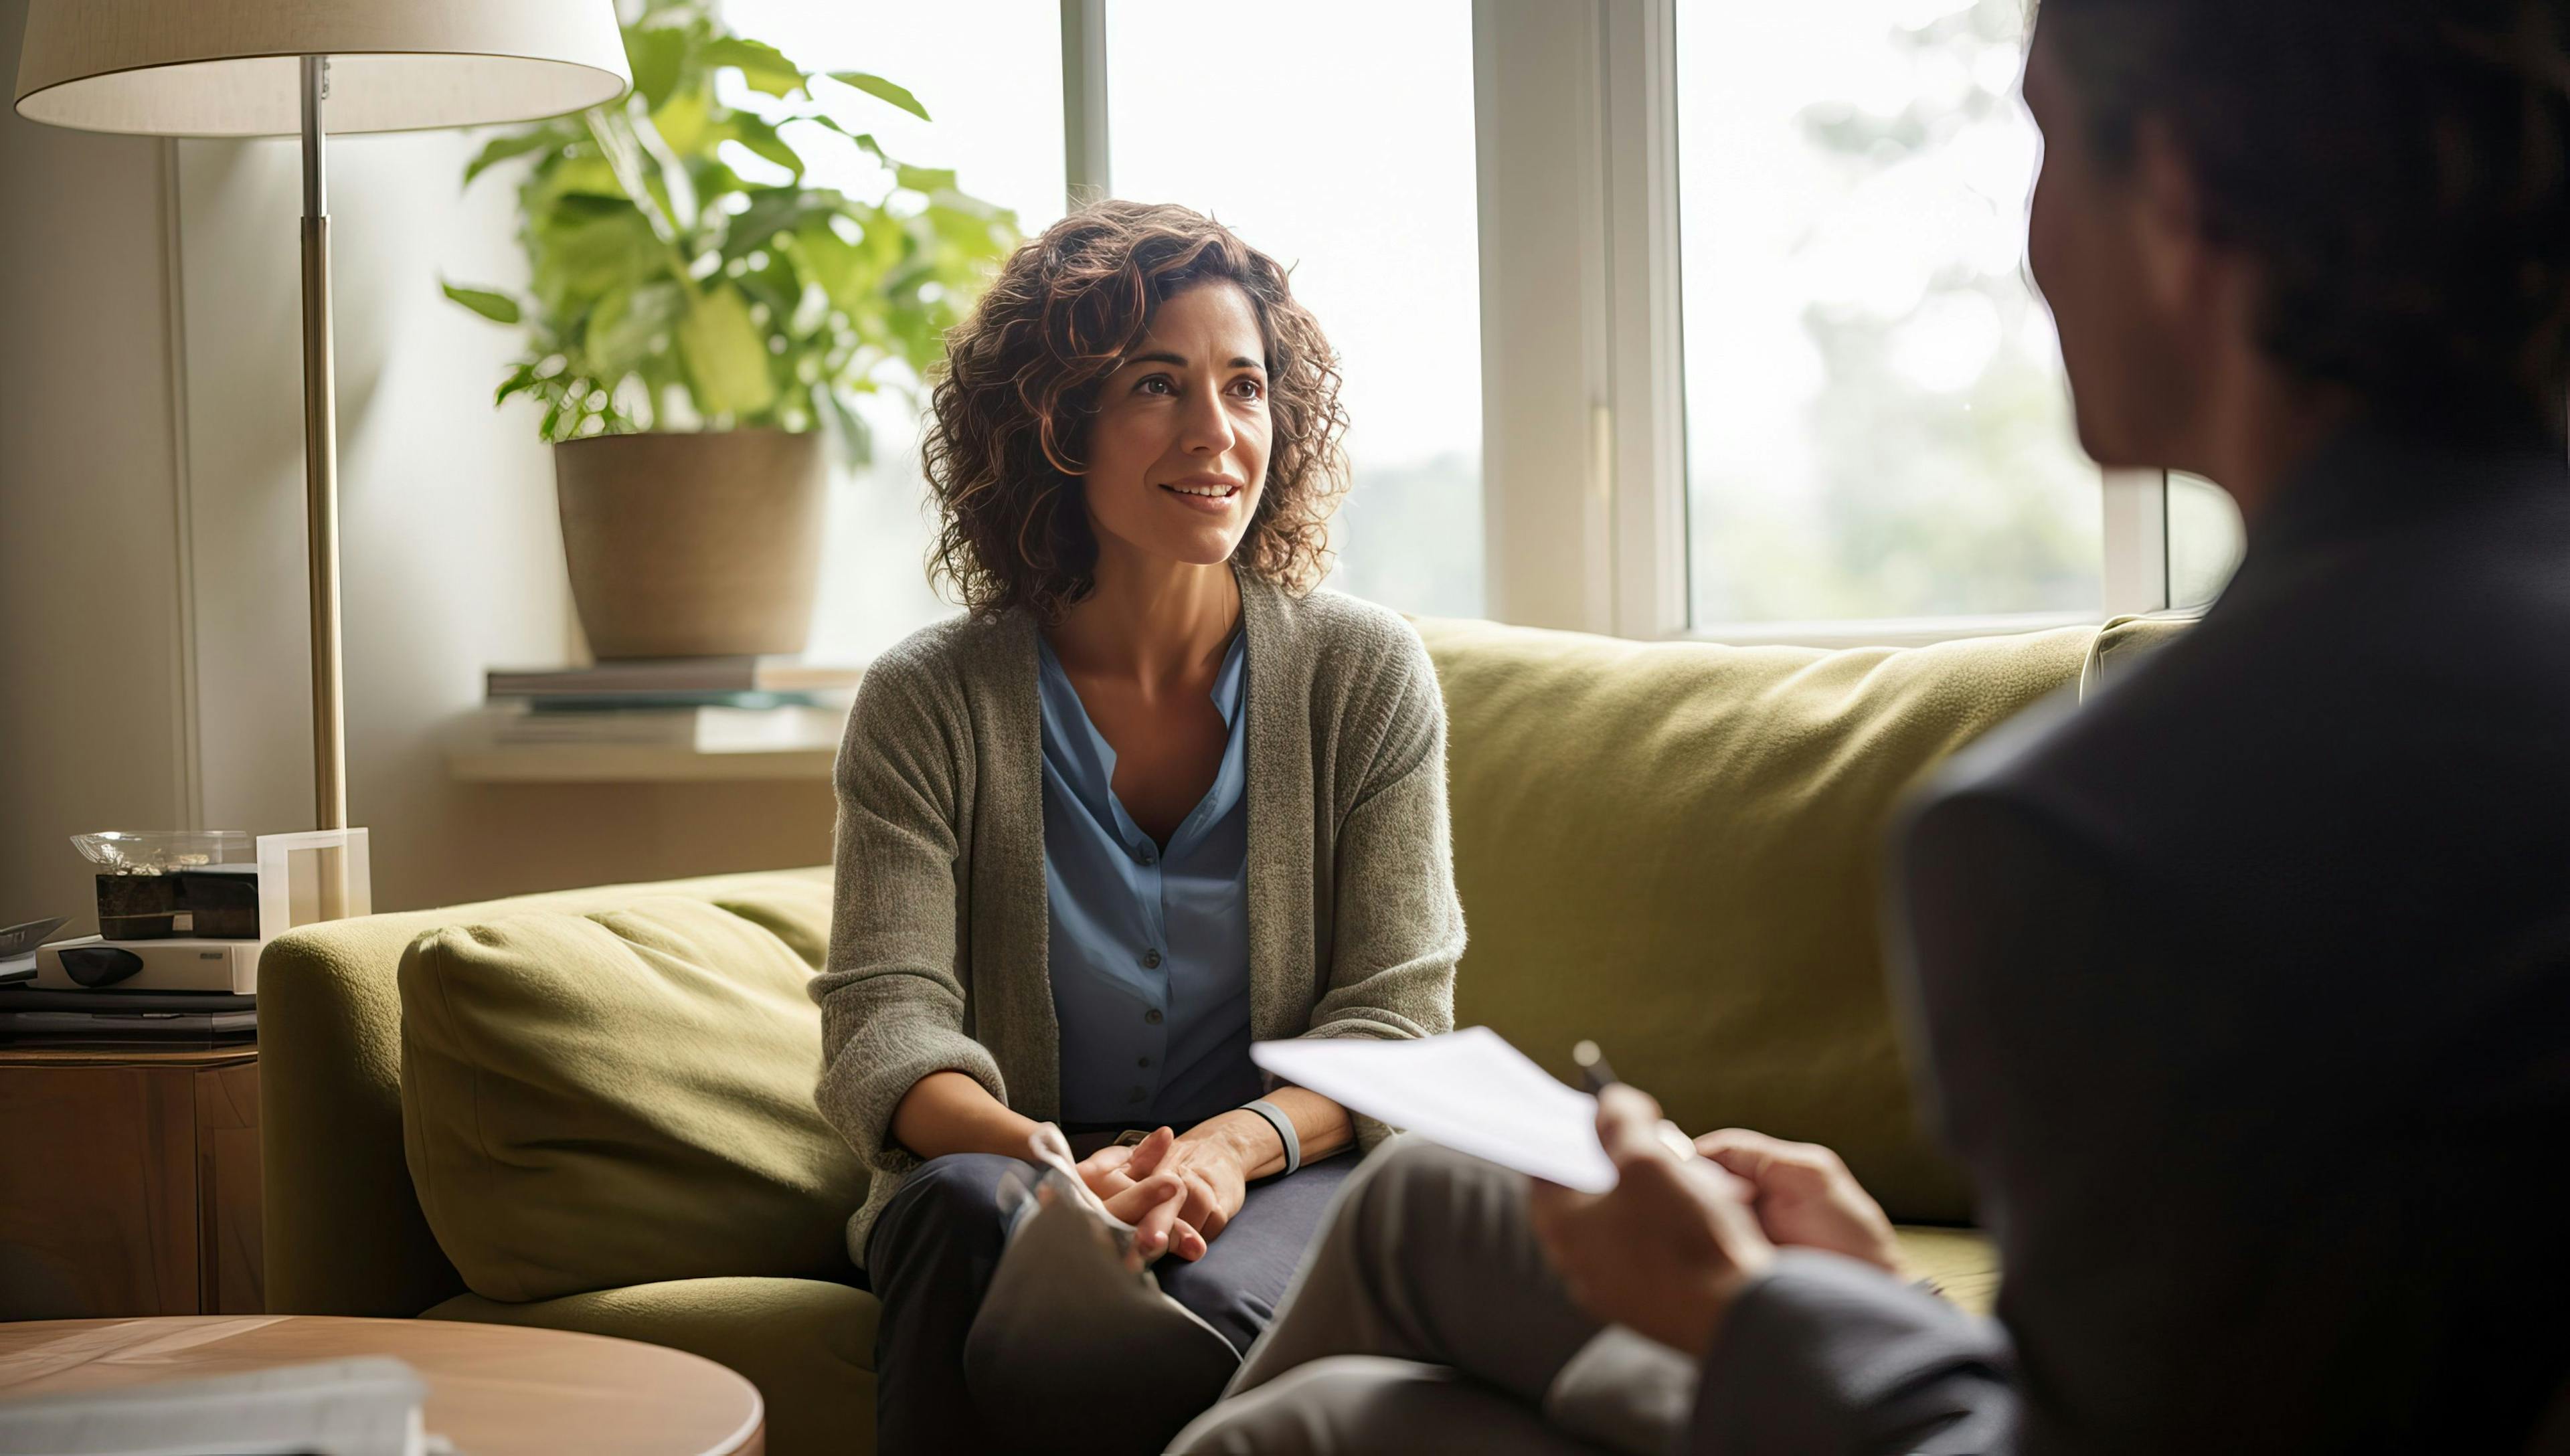 Can Cognitive Behavioral Therapy Change Quality of Life for AD Patients?